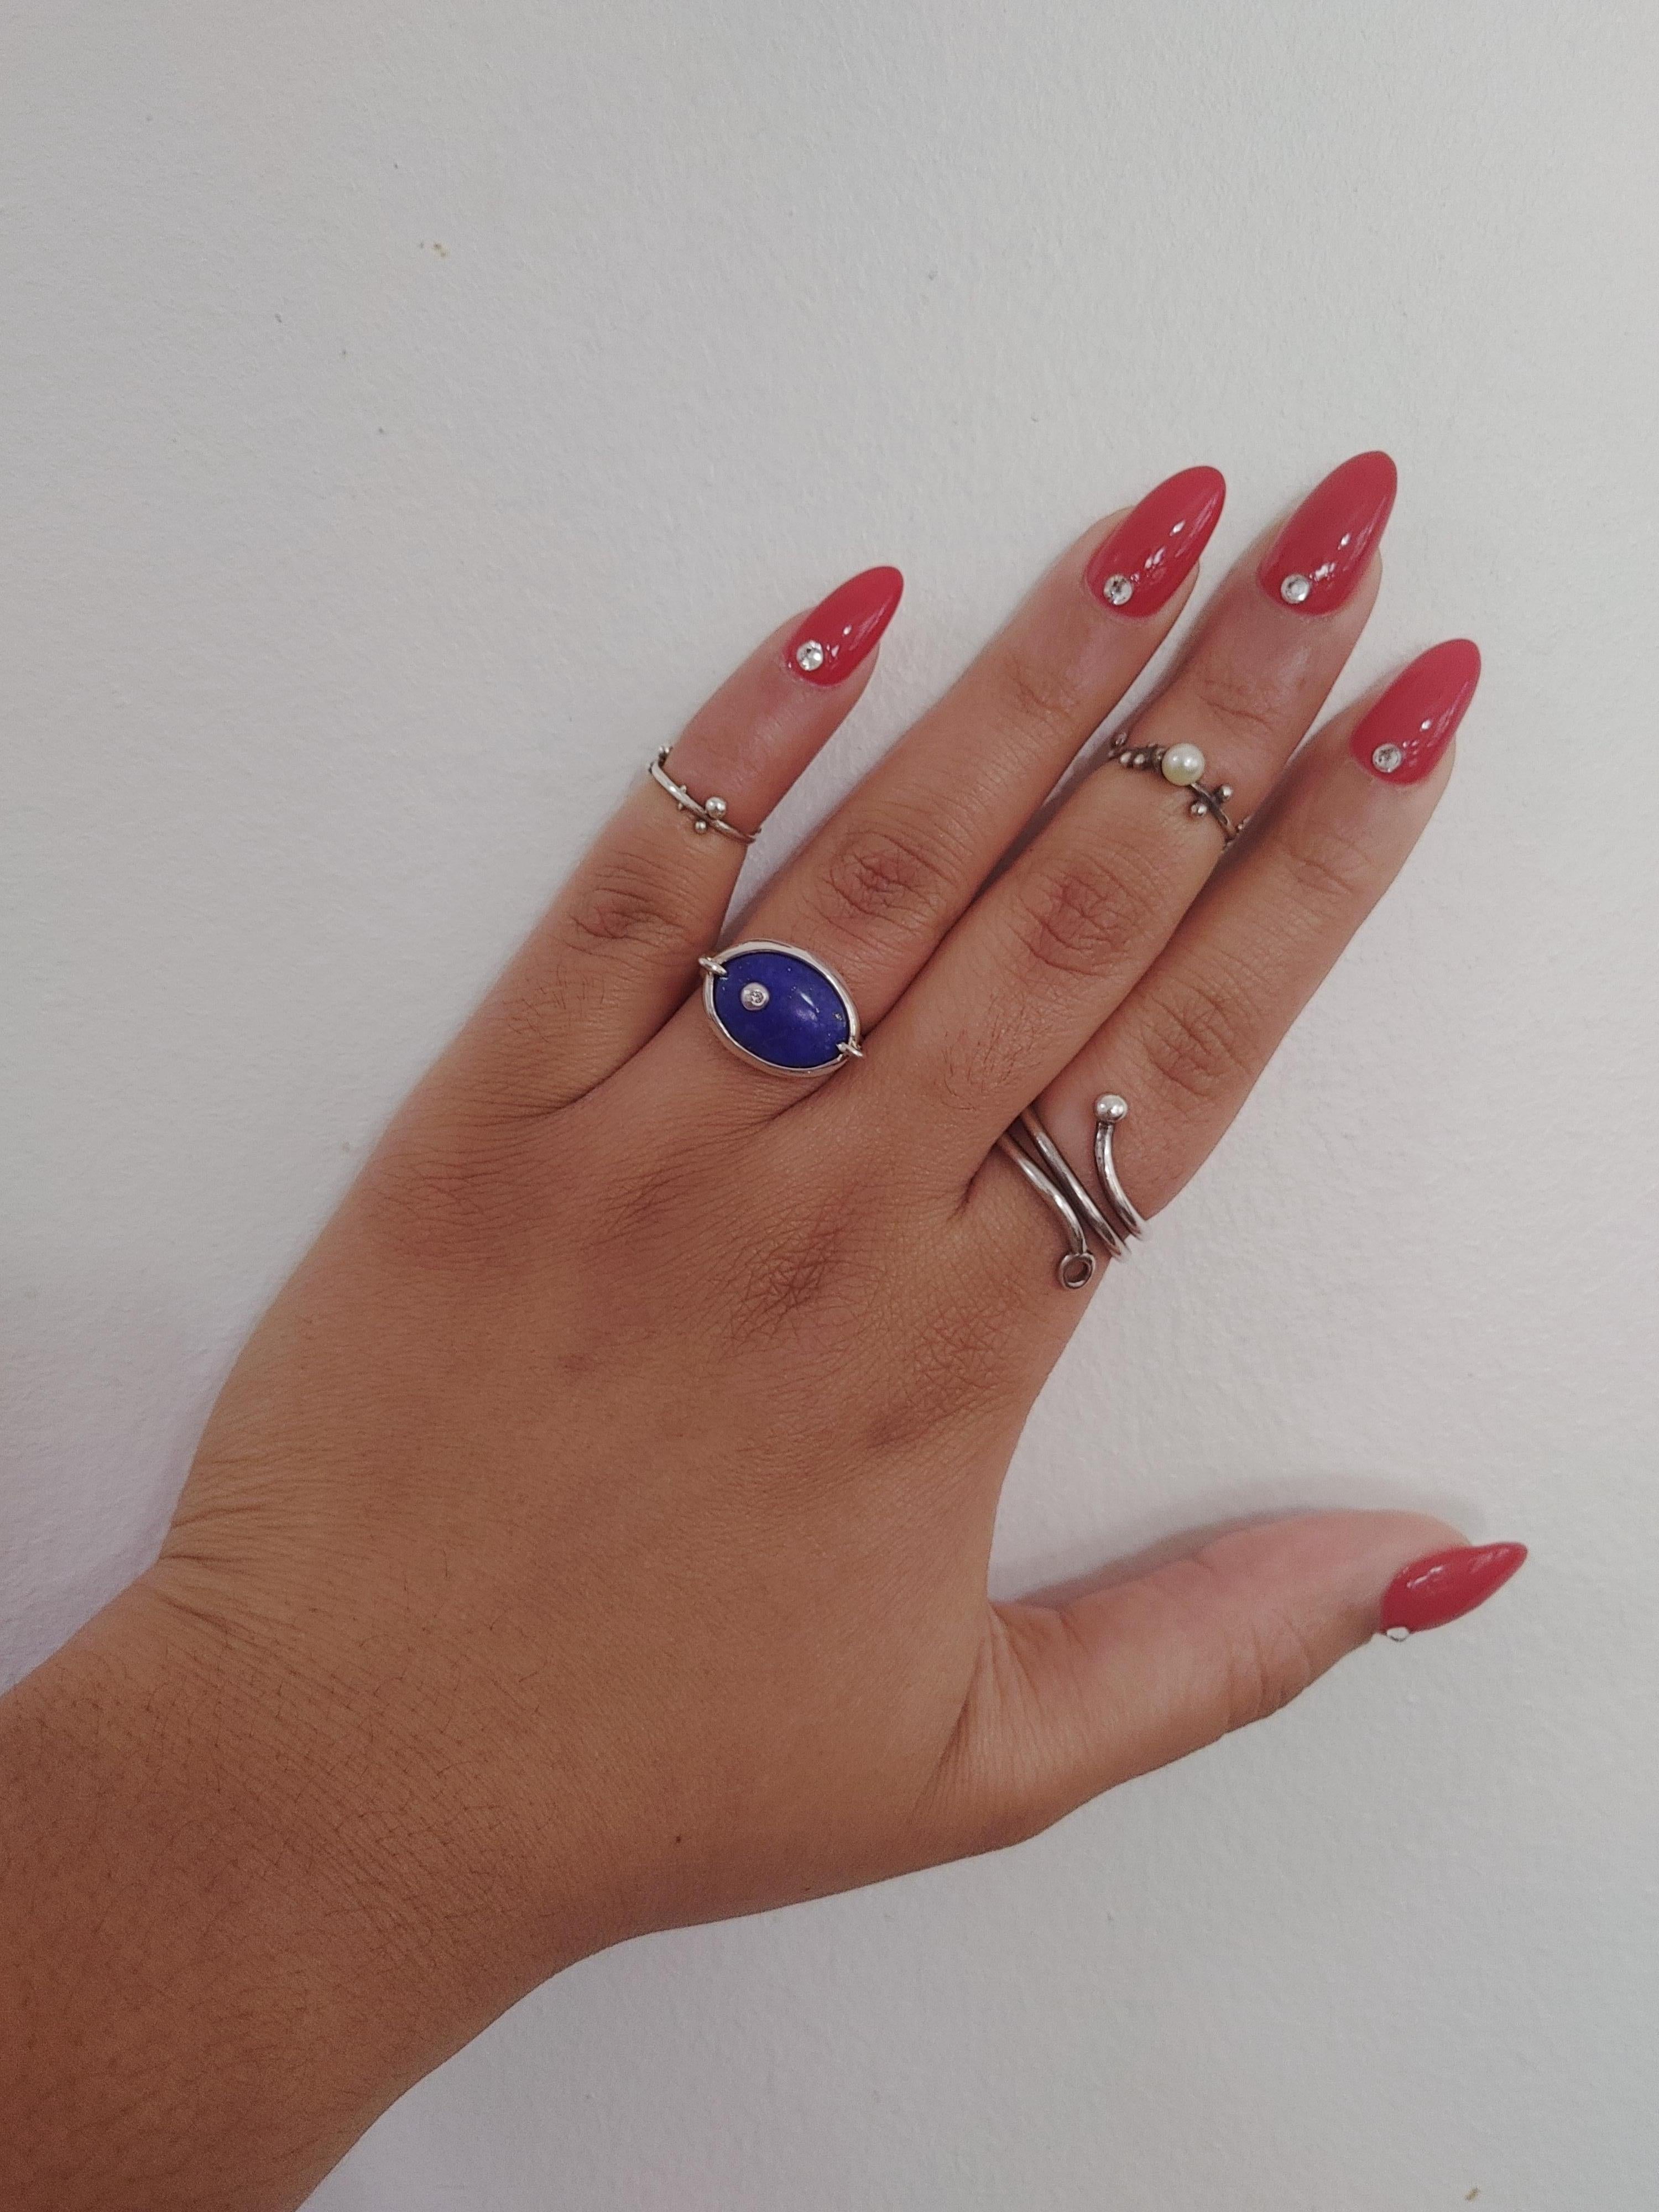 The Caribbean Night Sky Oval Ring captures the Caribbean sky at night with tiny glimpses of stars in Lapis Lazuli. It includes the signature rosebuds found within Angely Martinez Jewelry, in silver with a burnished set diamond.  

The ring’s shape